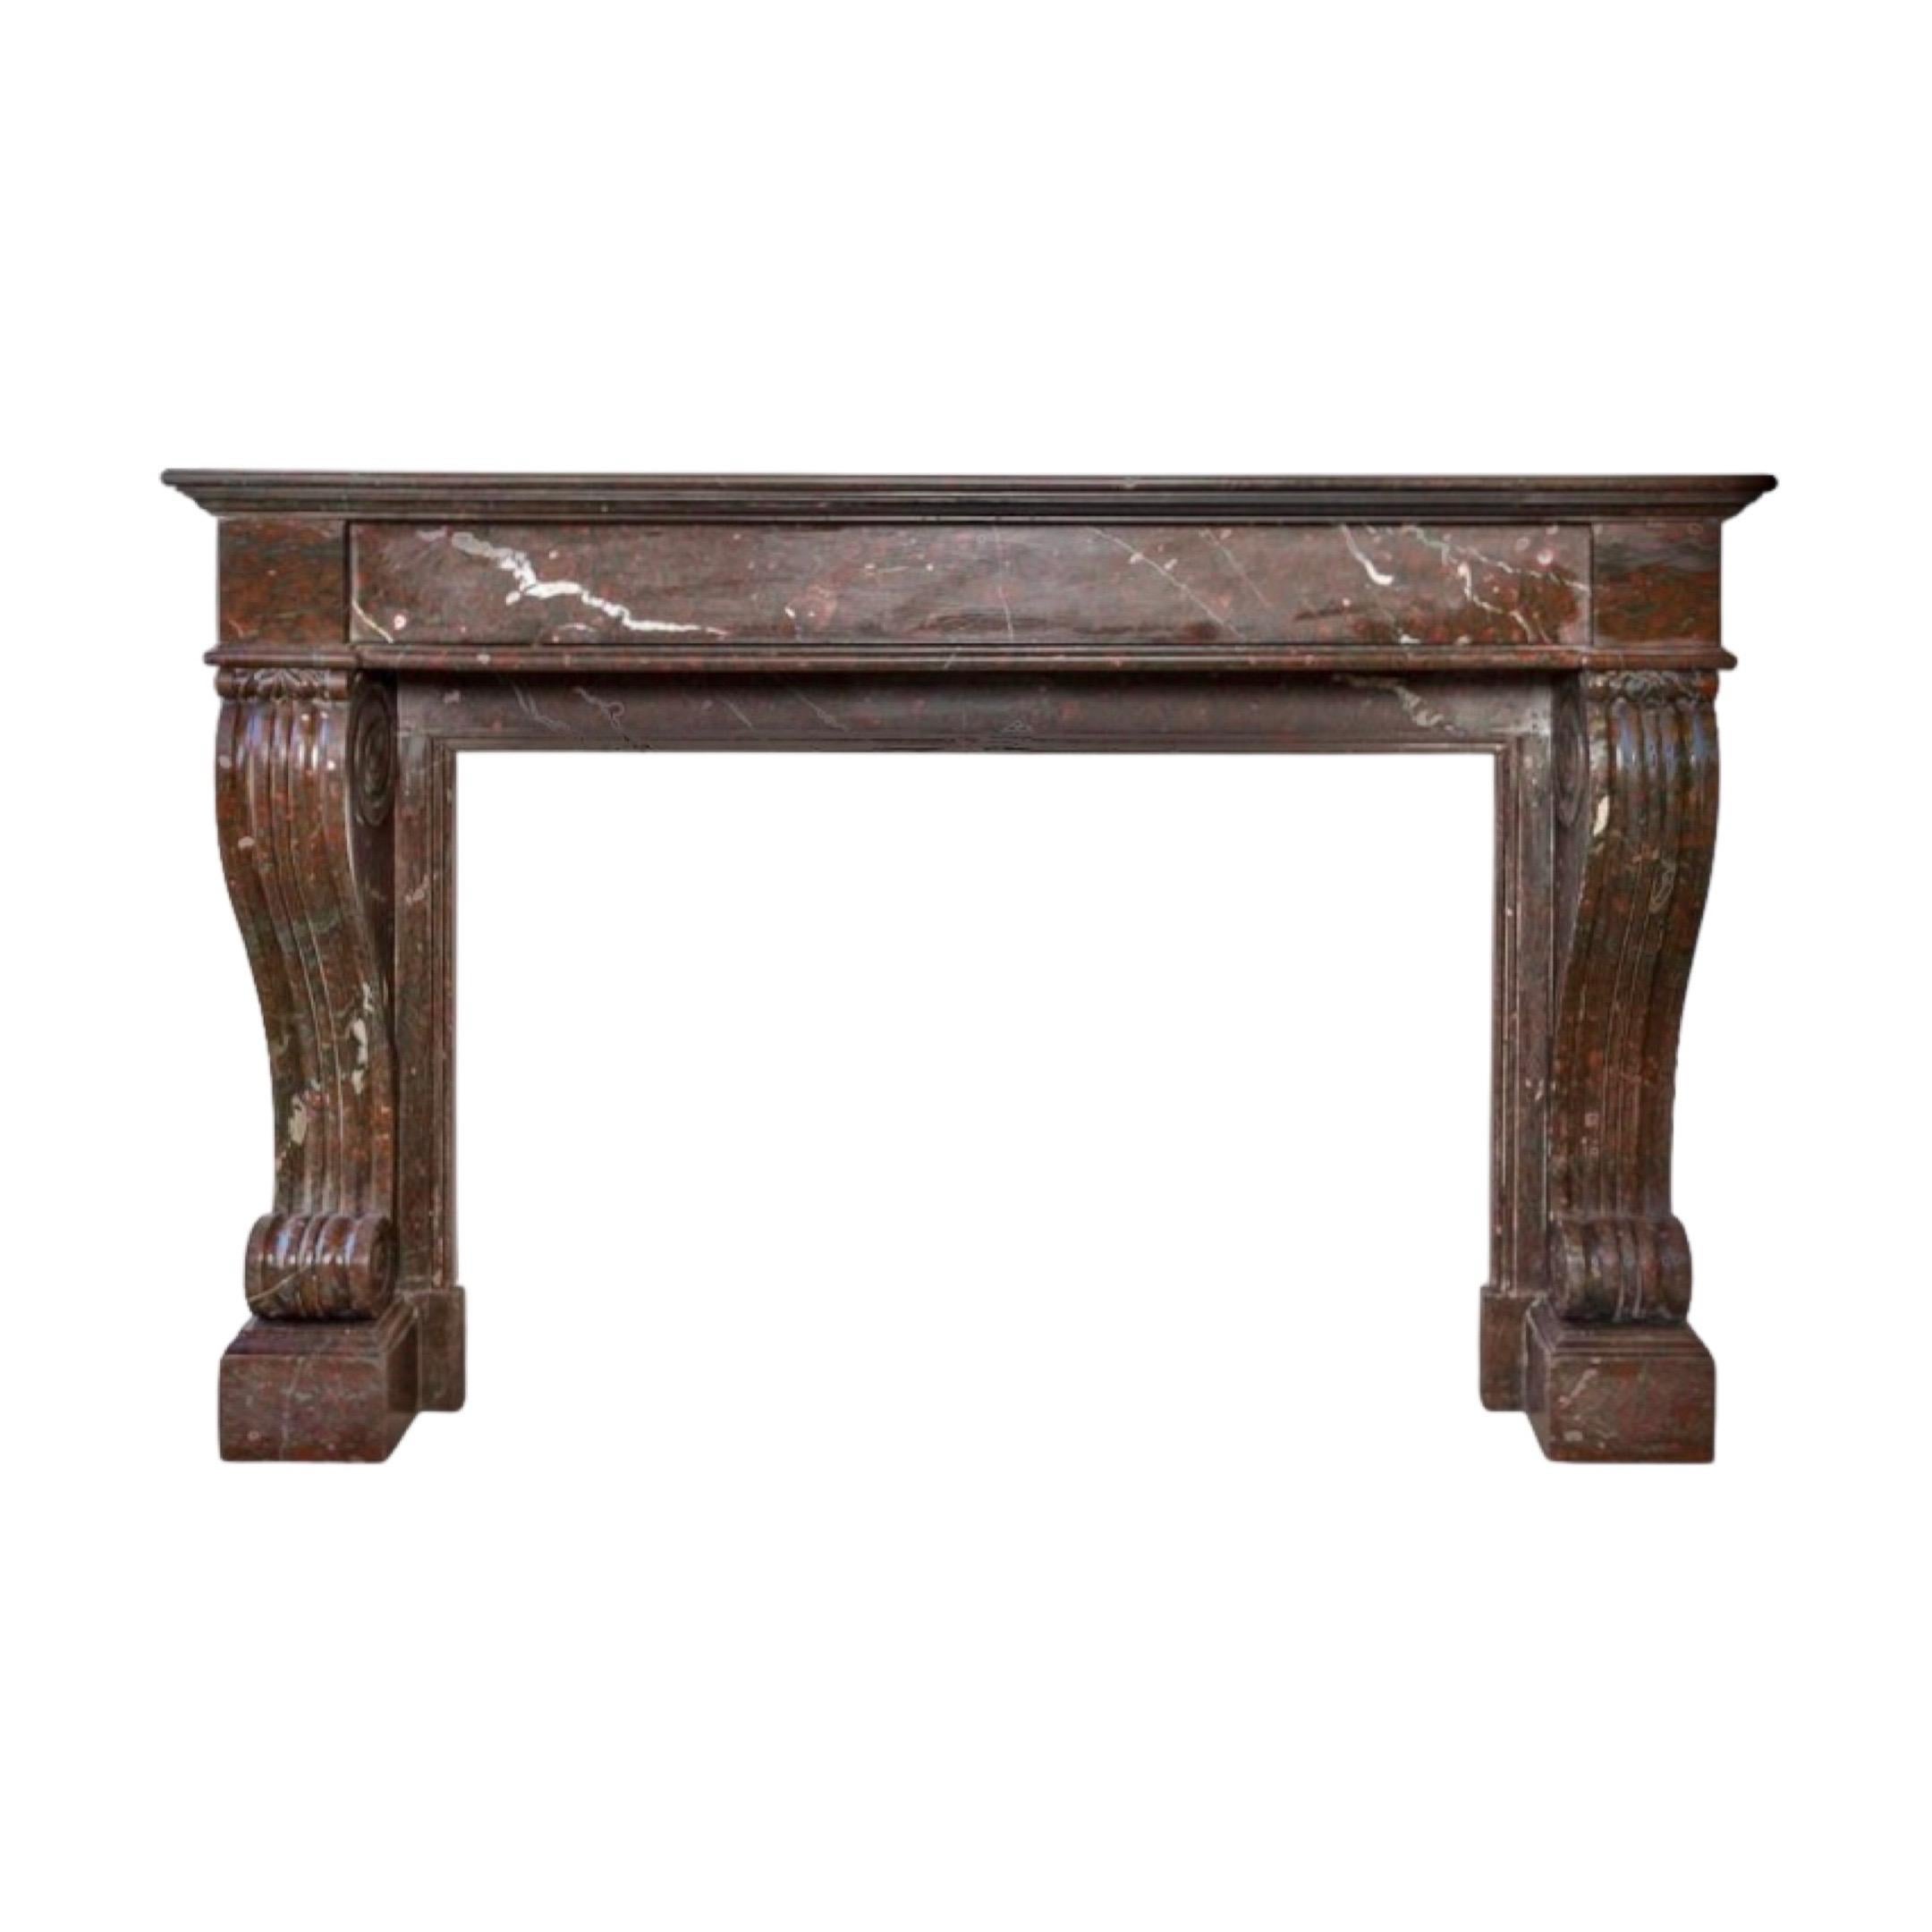 This elegant French Marble Mantel is an antique piece, originating from France circa 1820. Crafted from Red Griottee marble, this late Empire carved mantel features a generous S-scroll fluted pediment, and is supported by square block feet. A